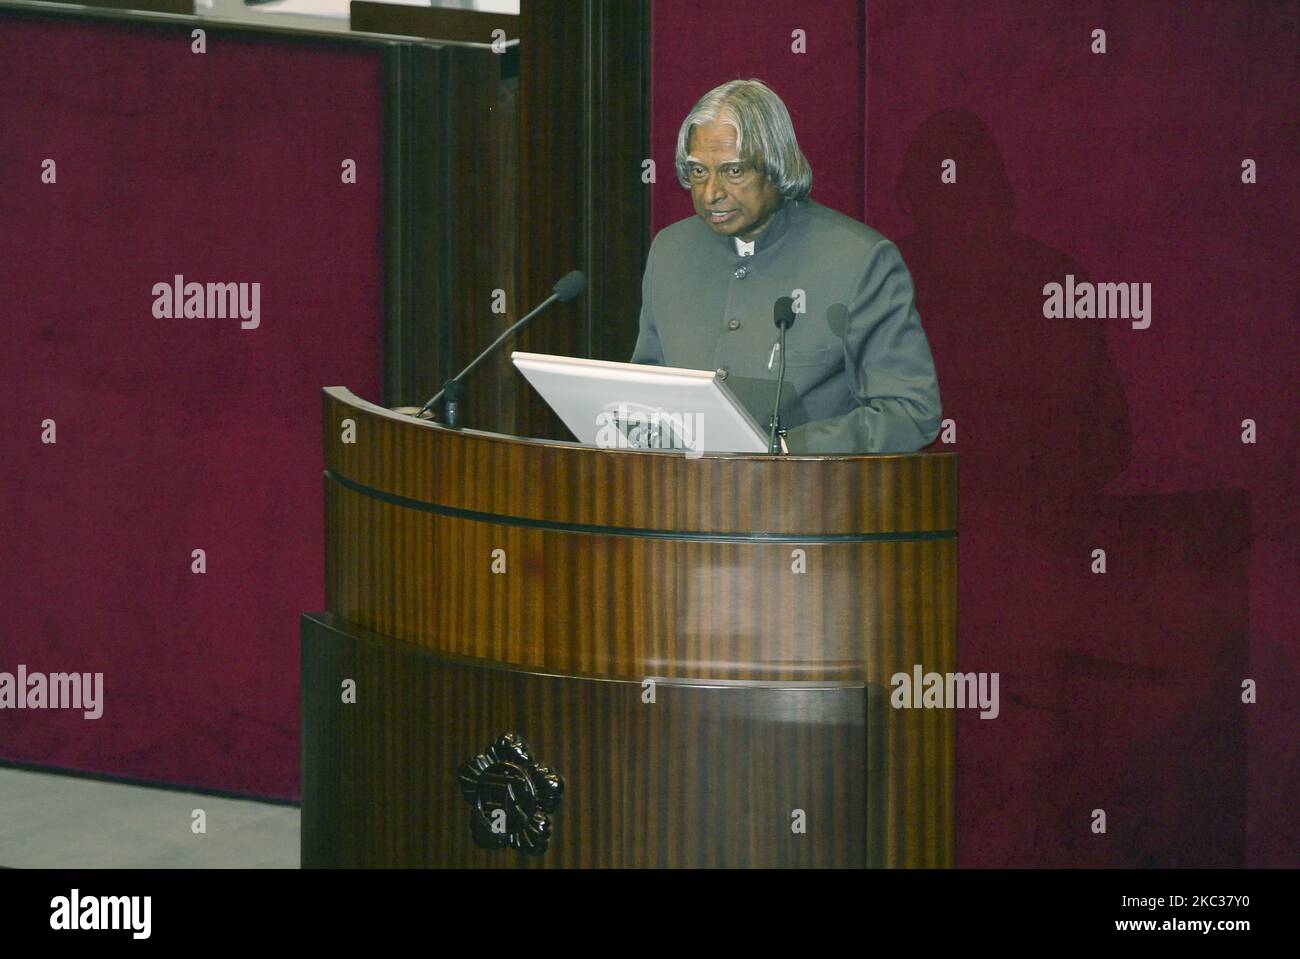 Indian President Abdul Kalam visit National Assembly after keynote addresses in Seoul, South Korea on Feb 8, 2006. (Photo by Seung-il Ryu/NurPhoto) Stock Photo